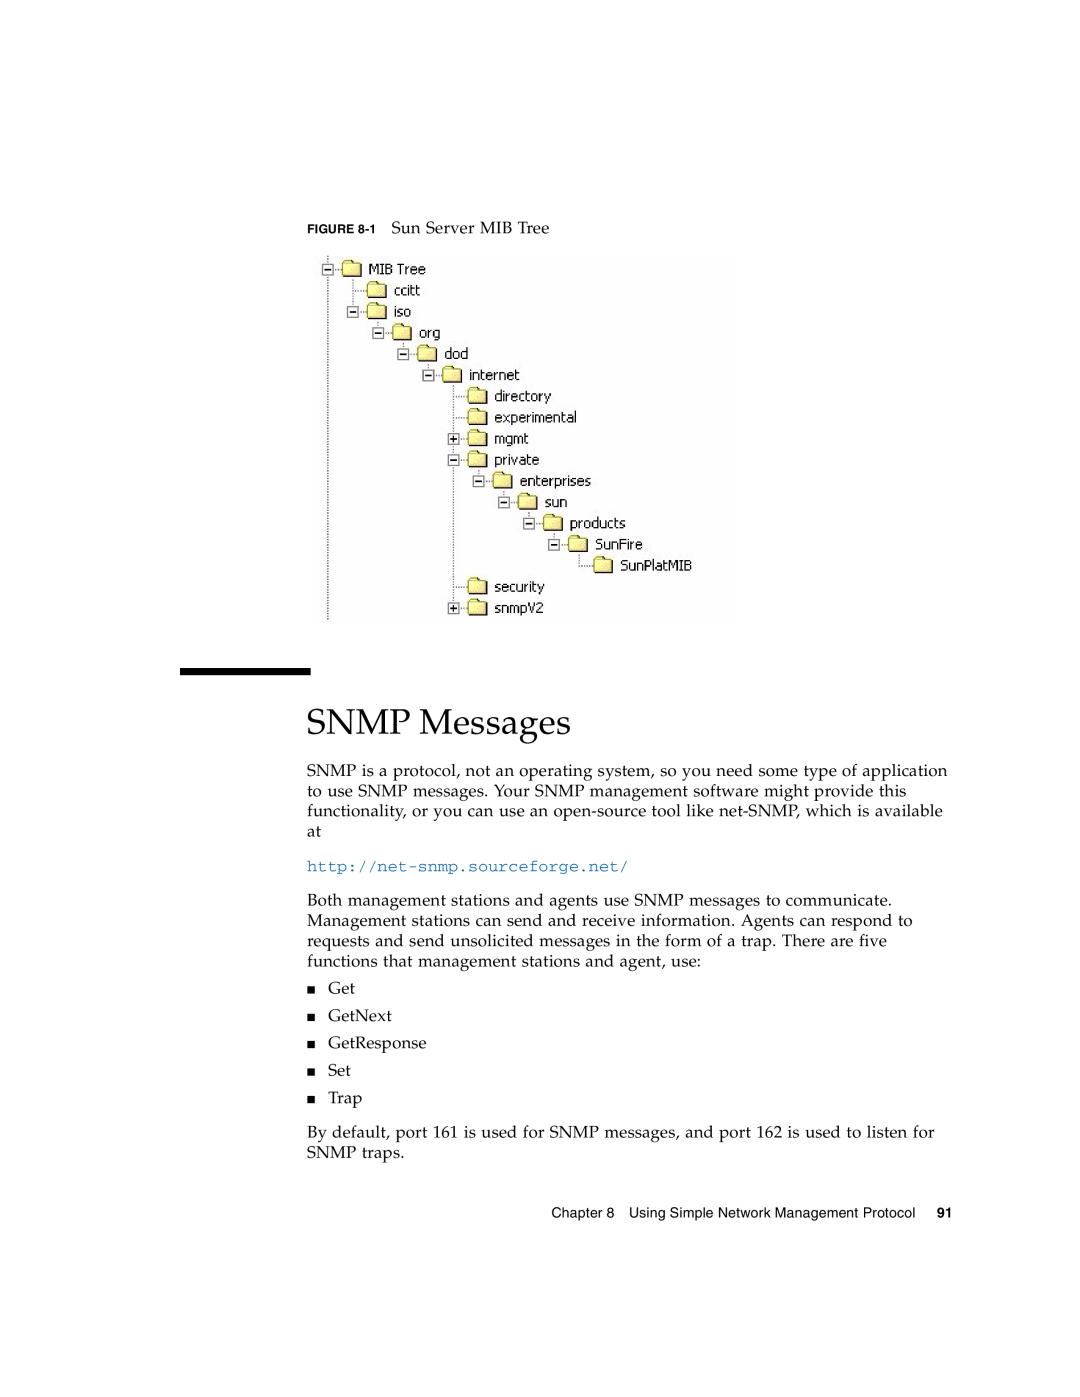 Sun Microsystems X4150 manual SNMP Messages, http//net-snmp.sourceforge.net 